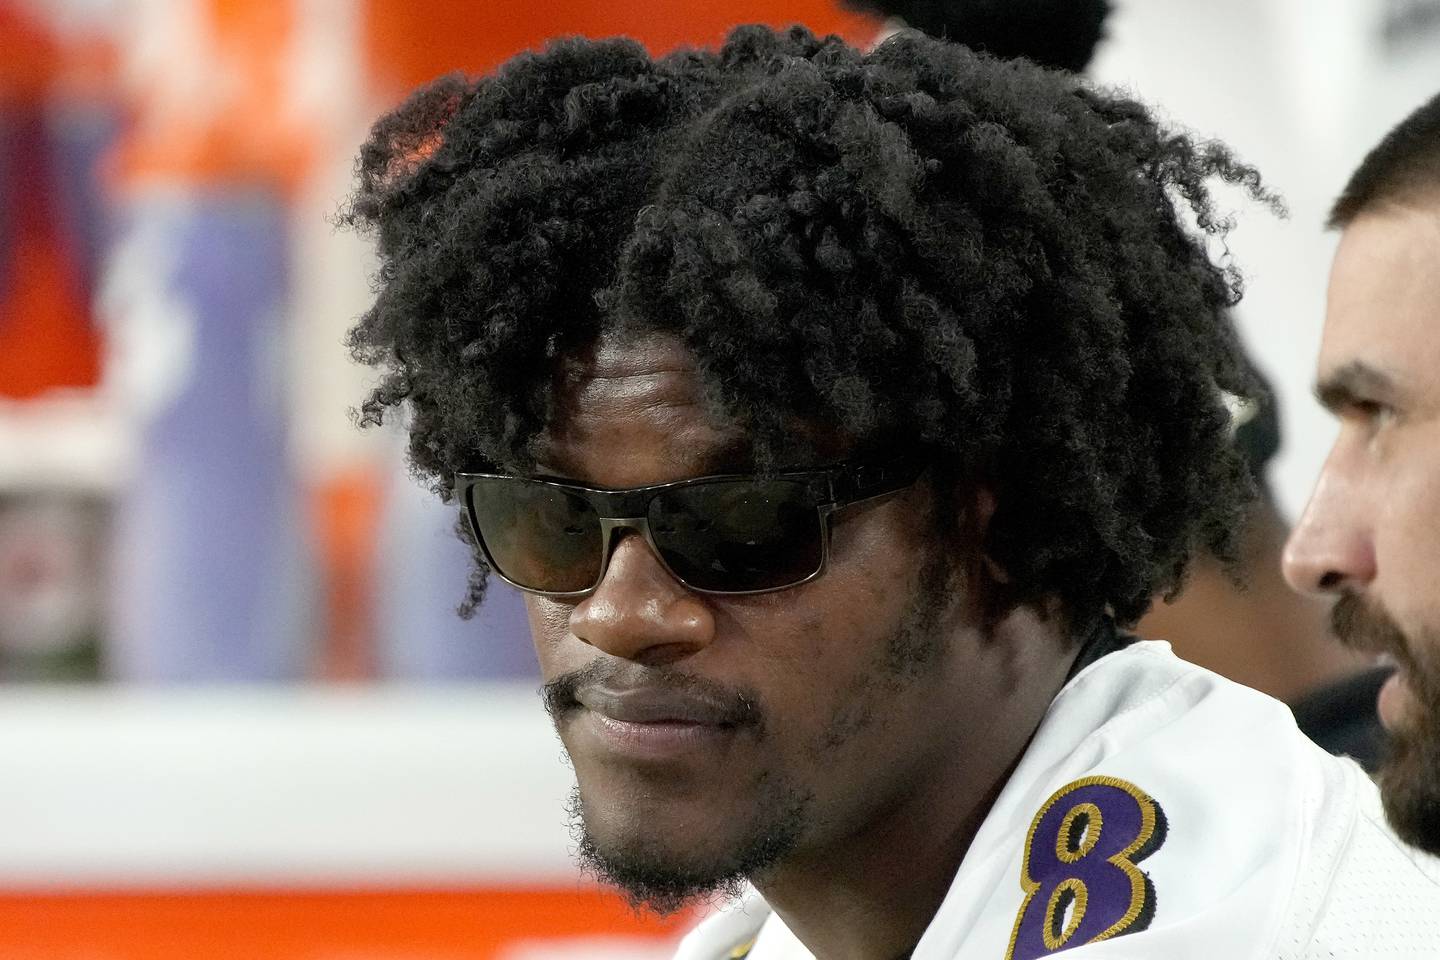 Baltimore Ravens quarterback Lamar Jackson watches from the bench during the first half of an NFL preseason football game against the Arizona Cardinals, Sunday, Aug. 21, 2022, in Glendale, Ariz. (AP Photo/Rick Scuteri)